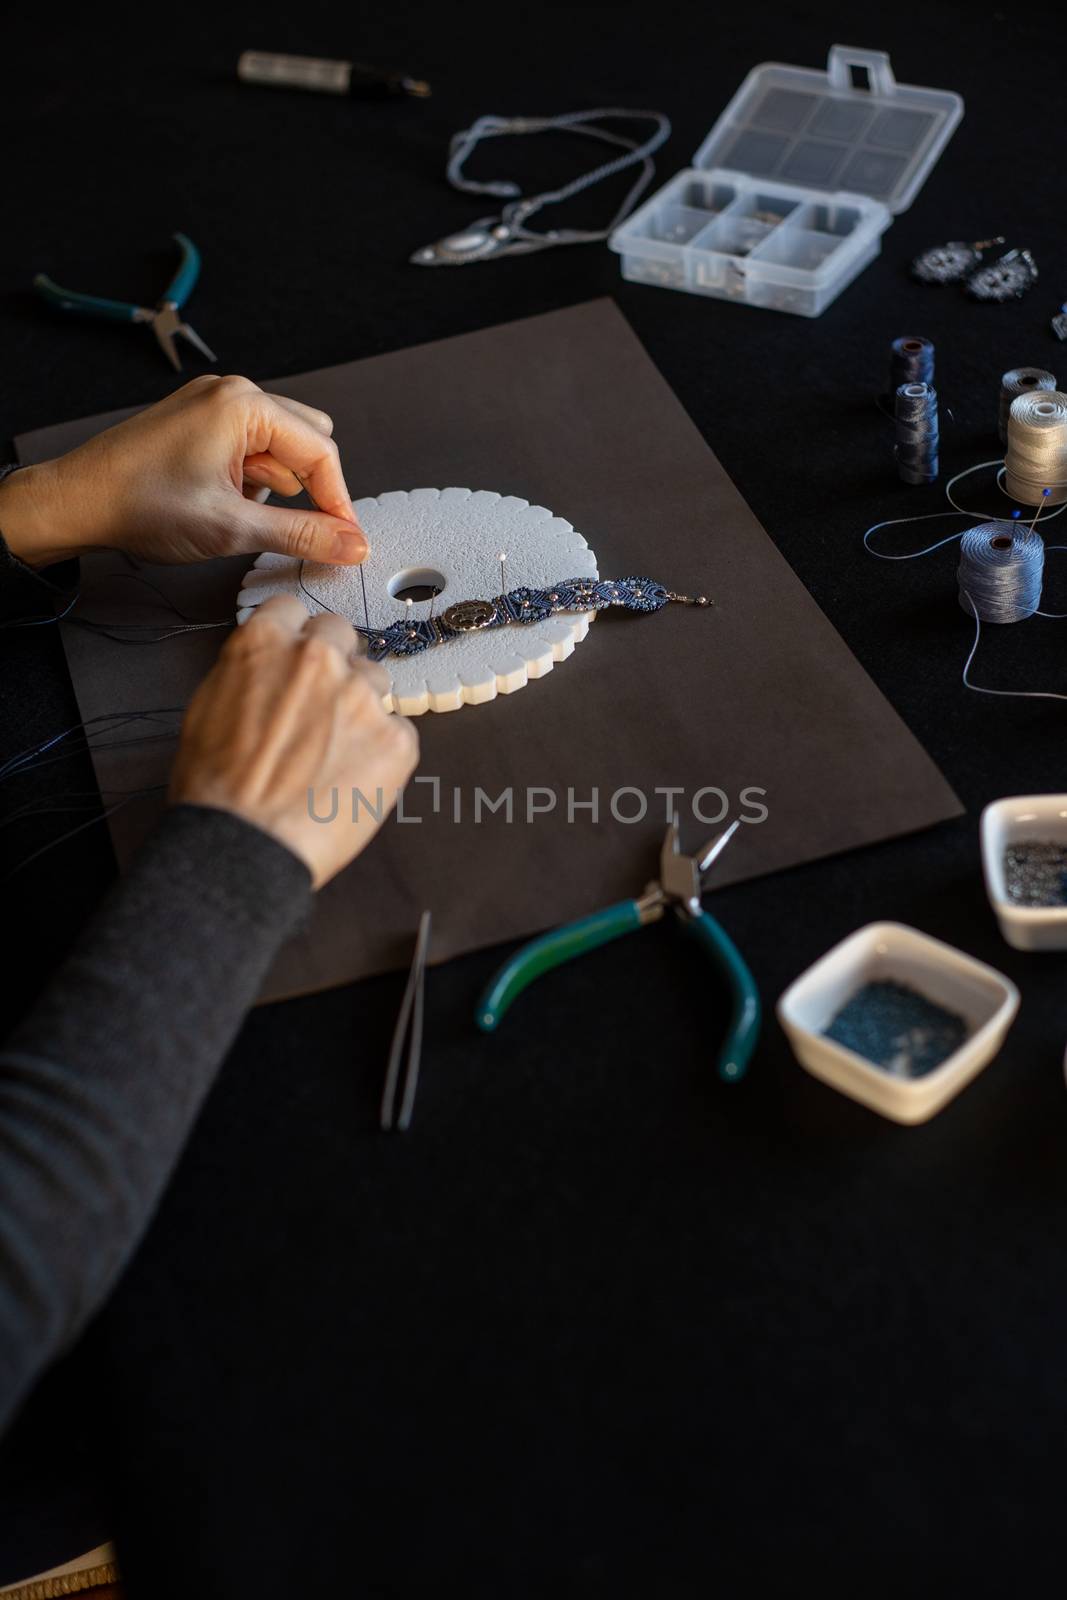 Lifestyle concept, work from home to reinvent your life: close-up of woman hands making macrame knotted jewelry with stone beads and tools on black work table by robbyfontanesi